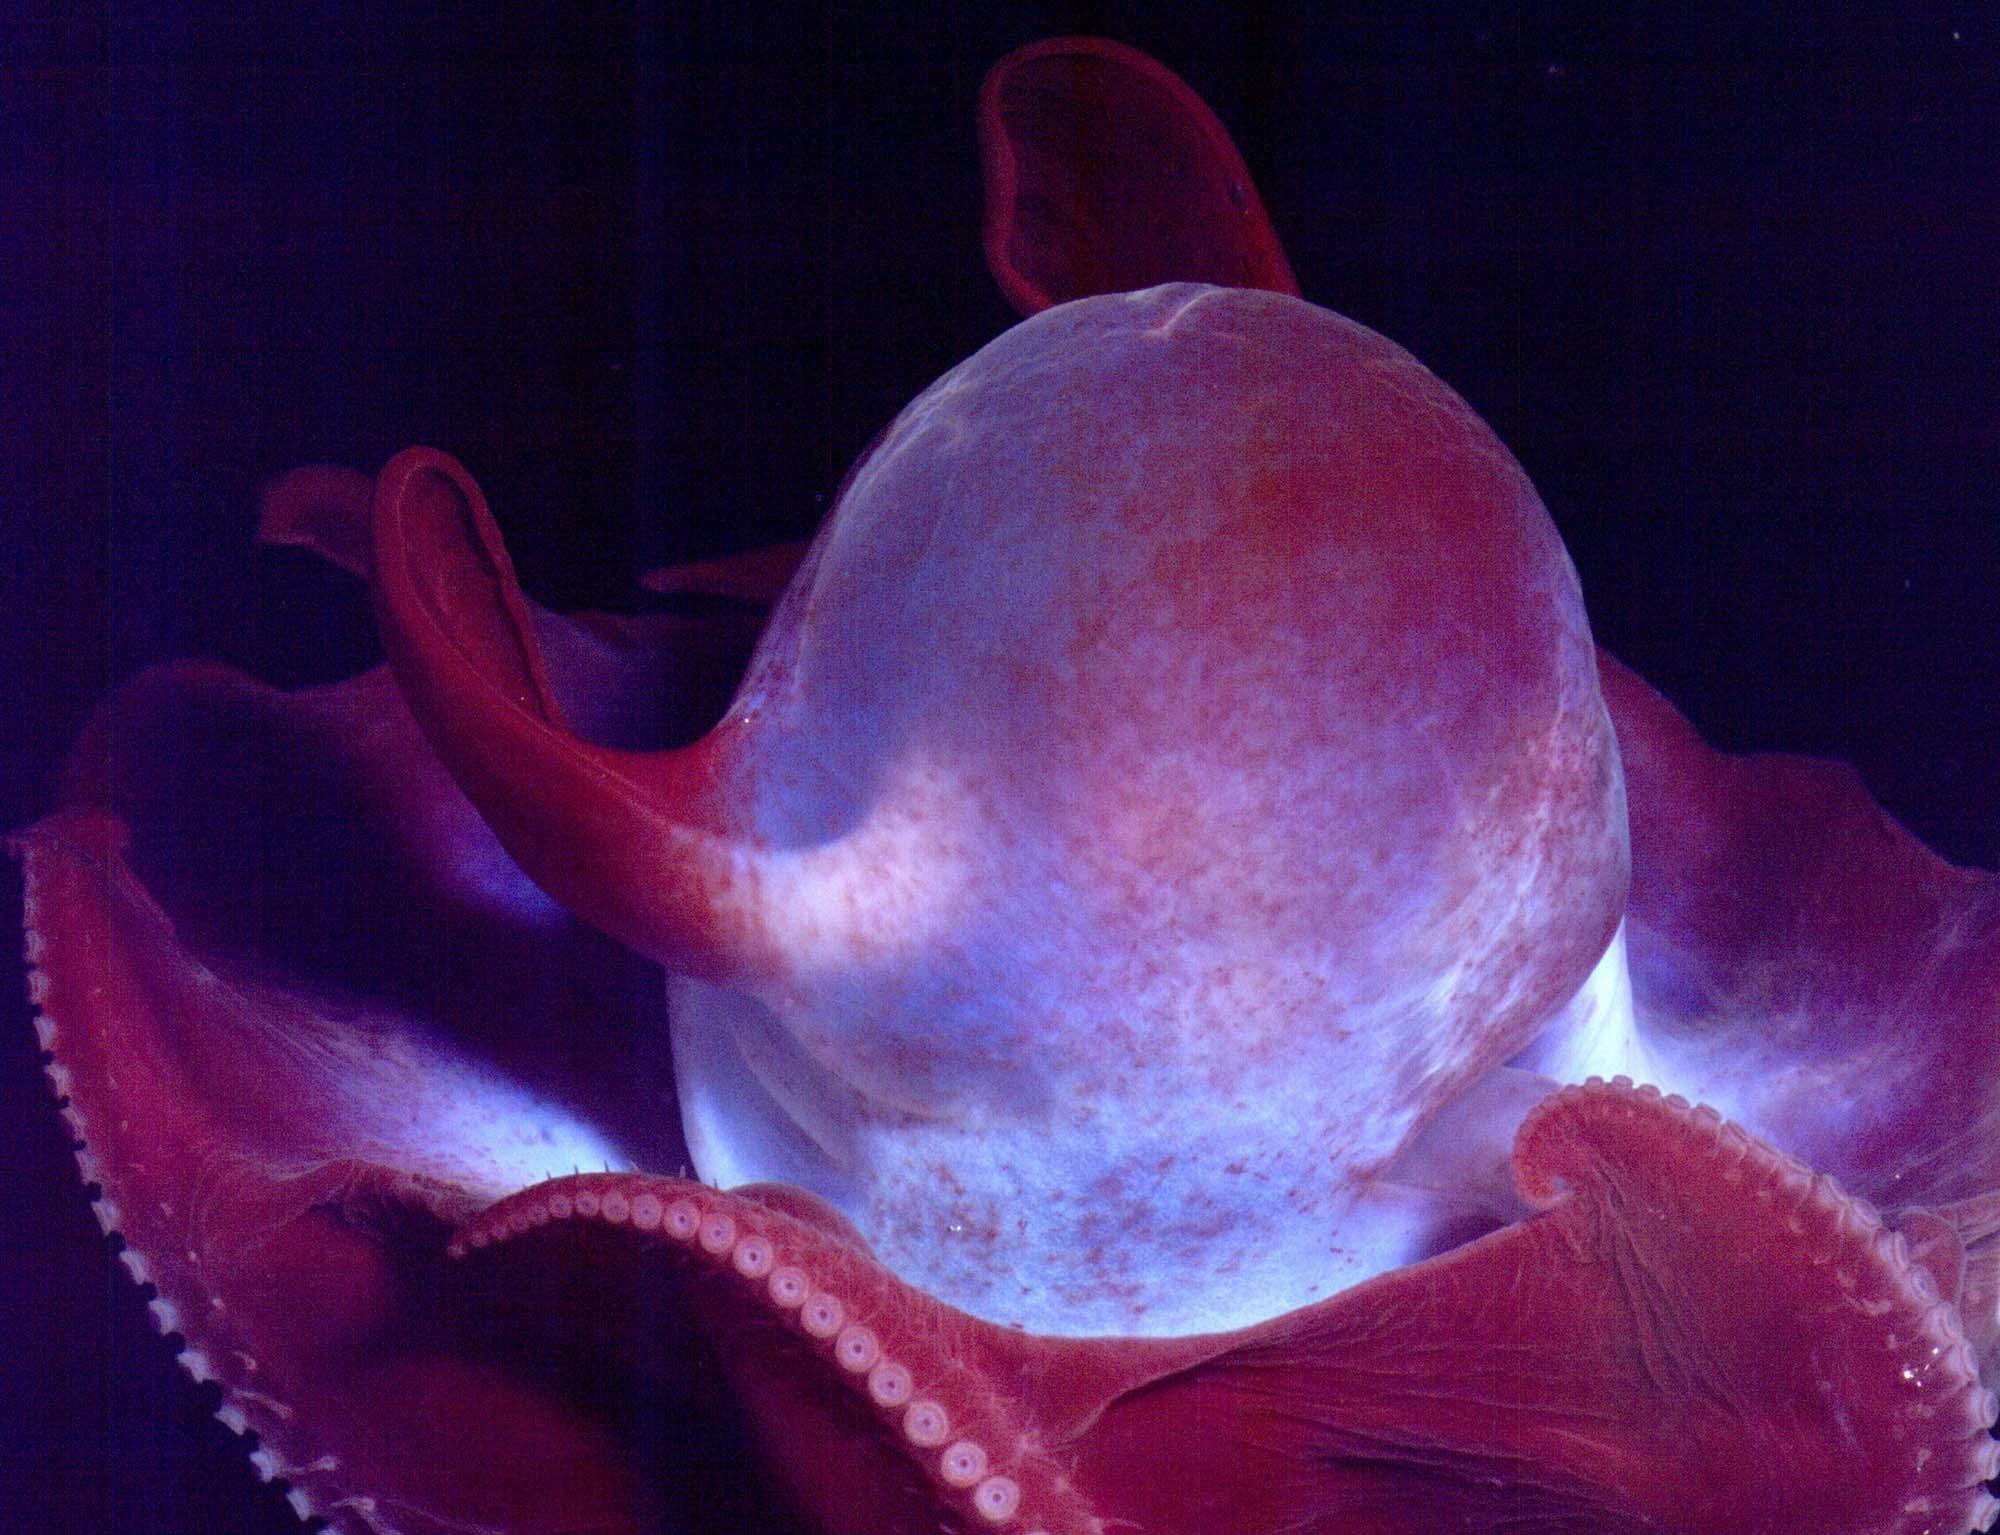 A purple-pink cirrate octopus that appears to be glowing blue at its center. It has two fins off the side of the head and appears to be moving through a pitch-black environment.